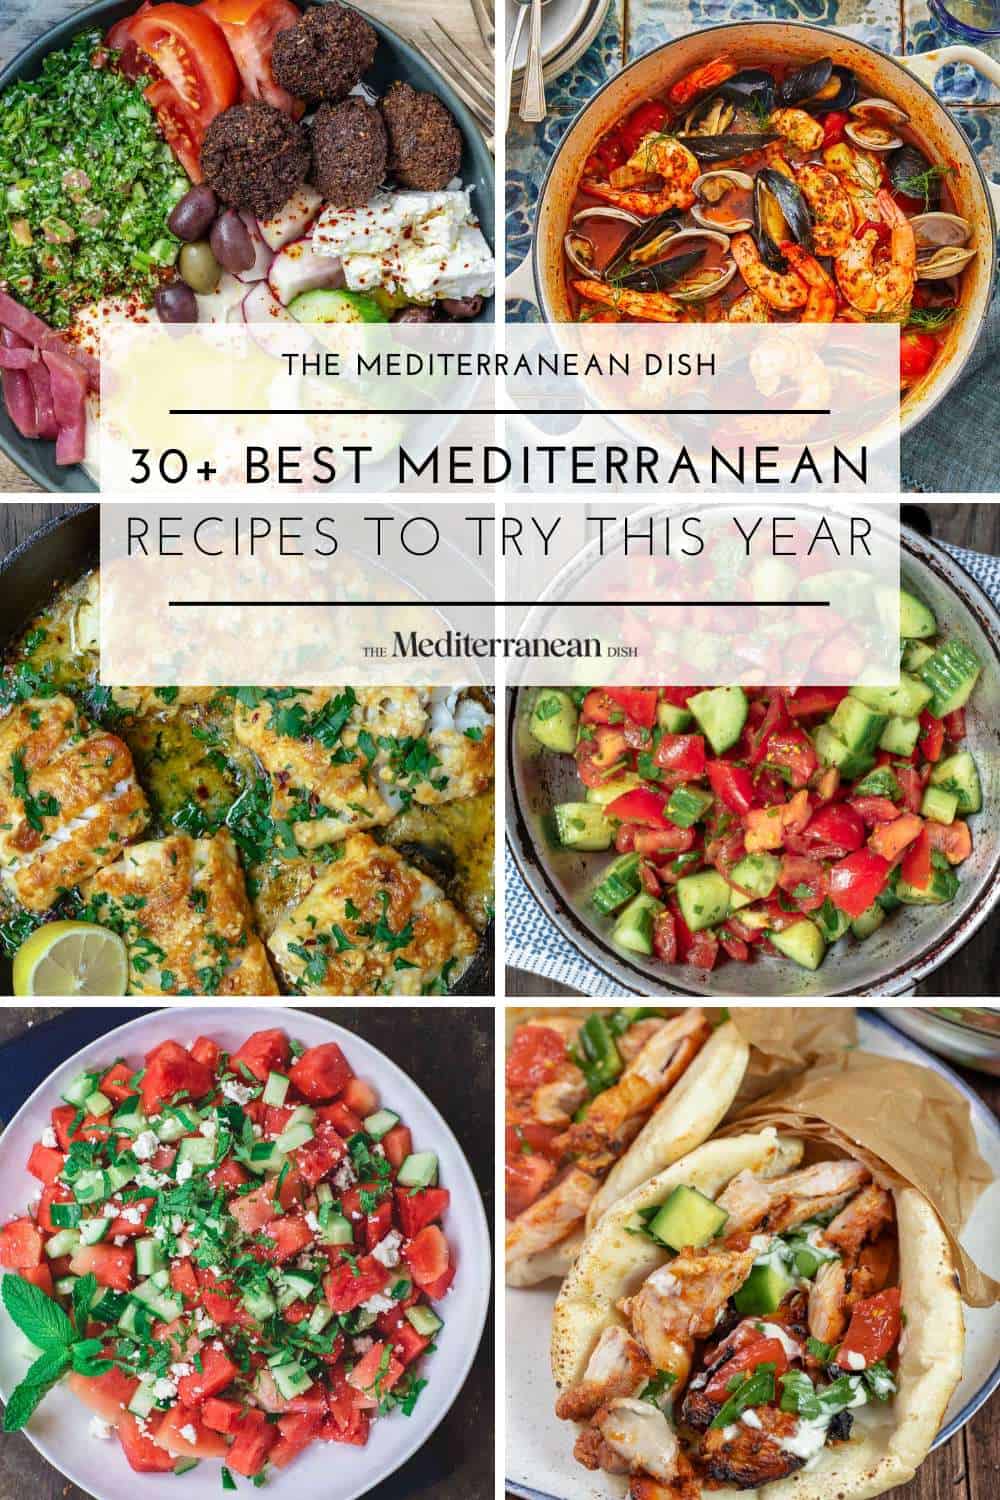 How to Do Mediterranean Keto - The FUTURE of Low Carb